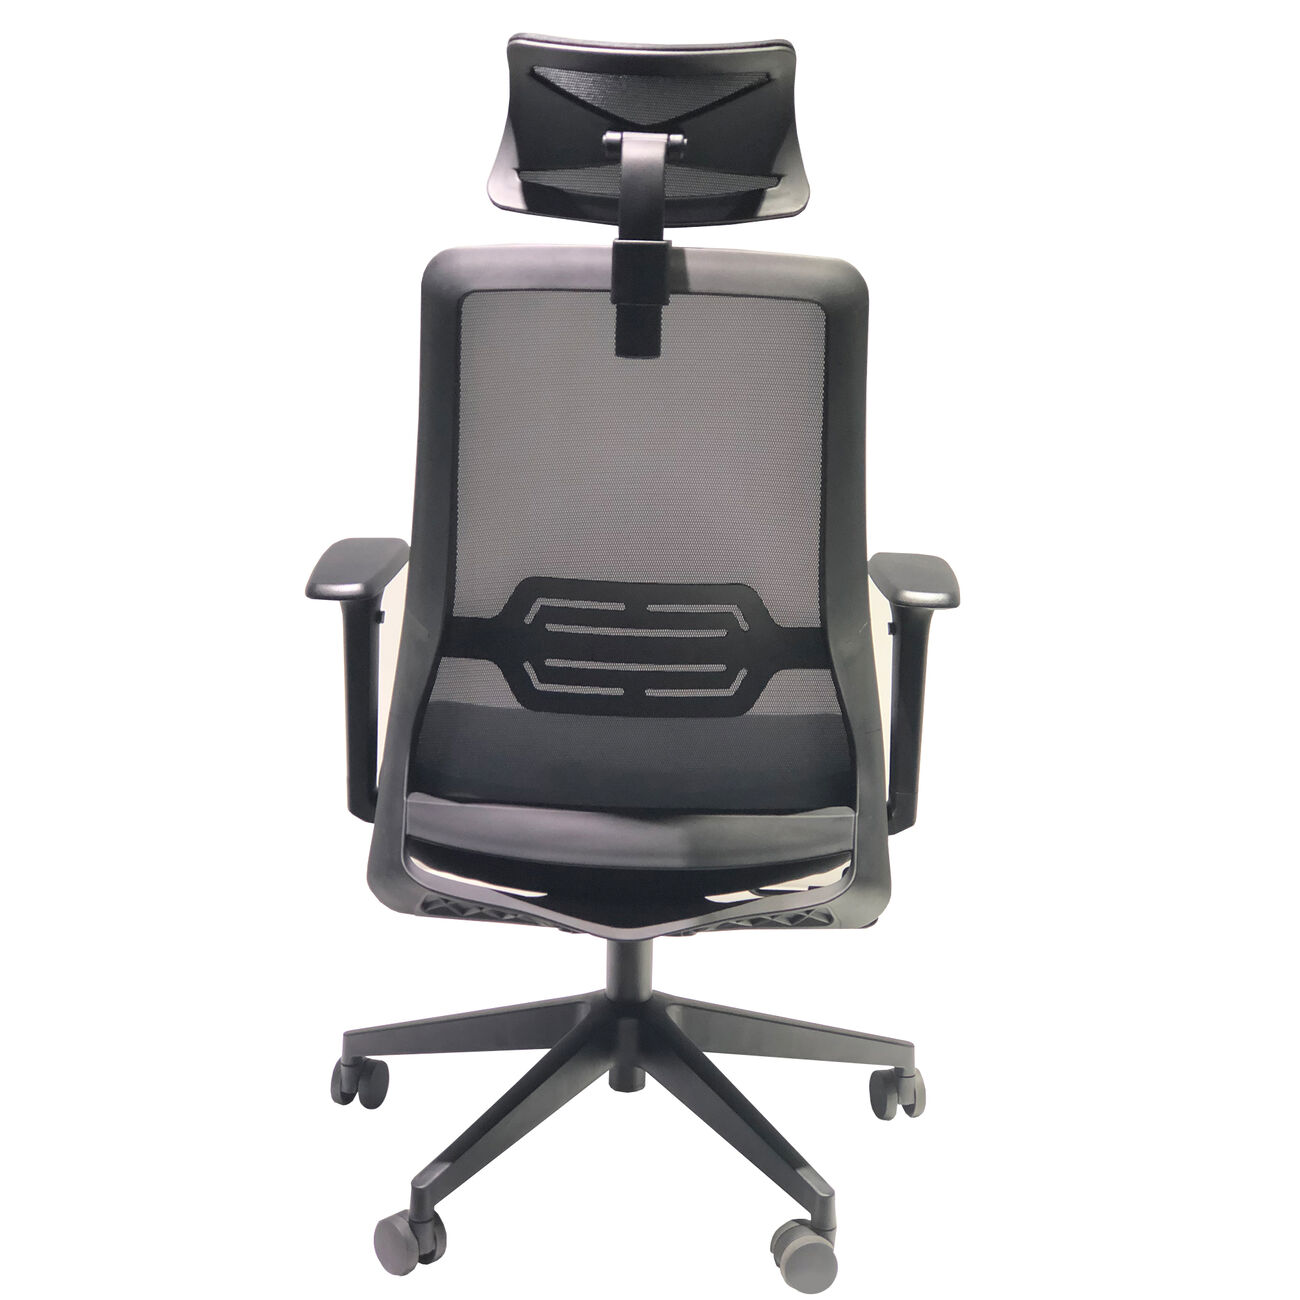 Adjustable Headrest Ergonomic Swivel Office Chair with Padded Seat and Casters, Black and Gray